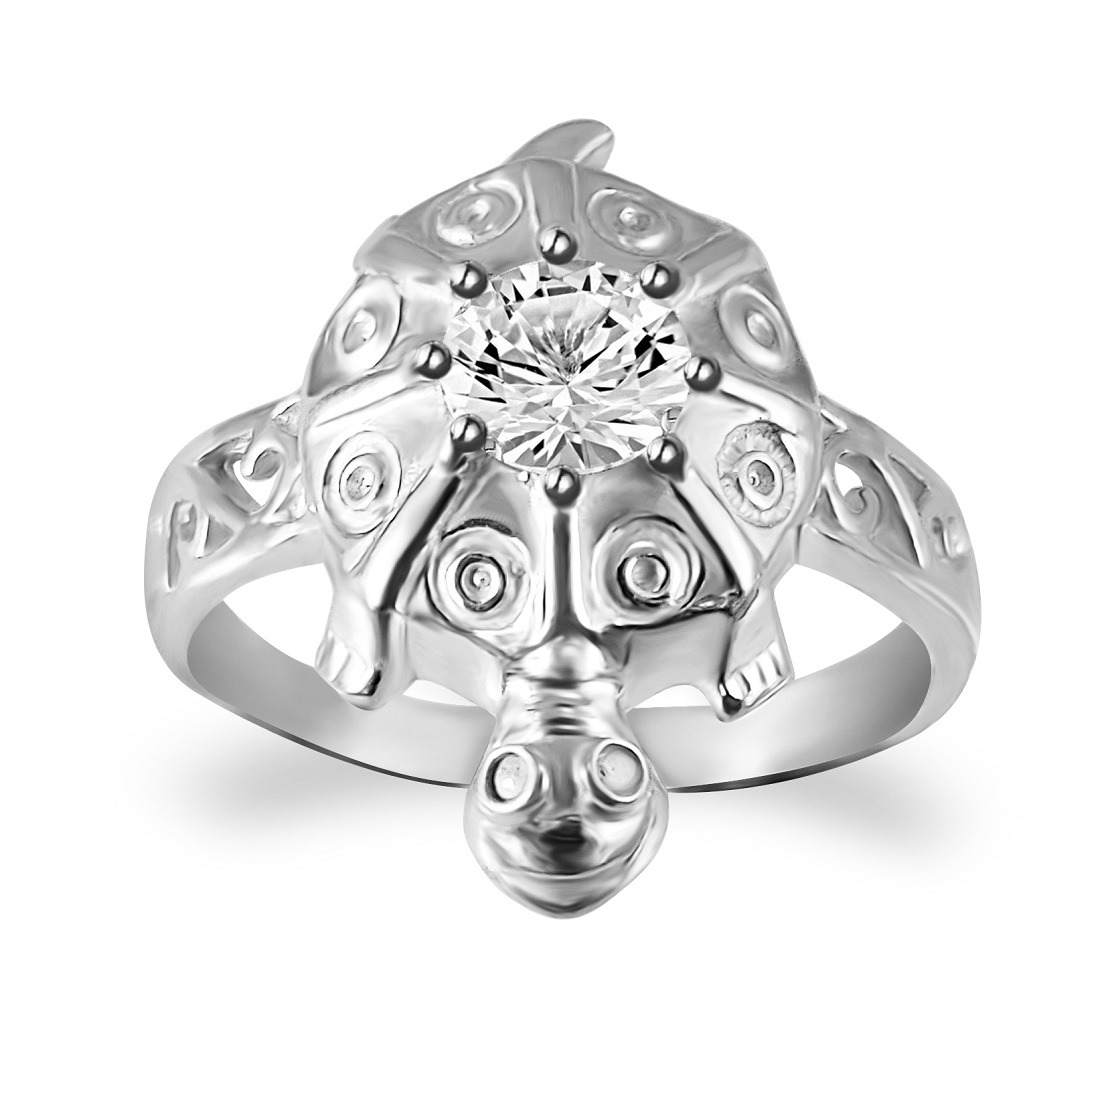 Buy ZAOJO Shree Yantra Unisex Adjustable Tortoise Ring For Good Luck  (R_TORTOISE_106) | Turtle Ring for Wealth and Prosperity | Antique look |  Meru Design | For men and women | St at Amazon.in